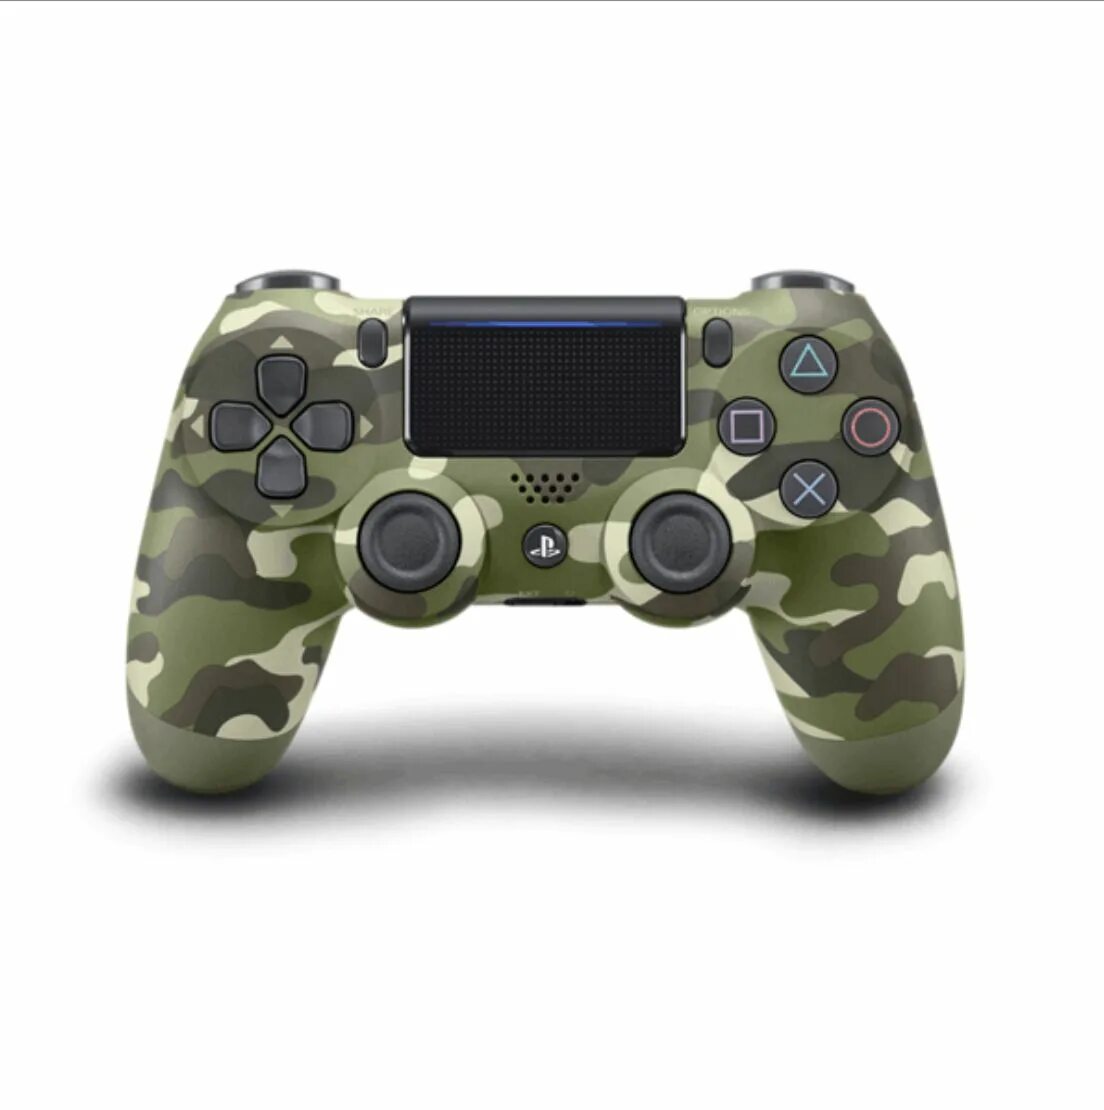 Ps4 джойстик android. Sony Dualshock 4. Ps4 Gamepad. Sony Dualshock 4 v1. Dualshock ps4 камуфляж.